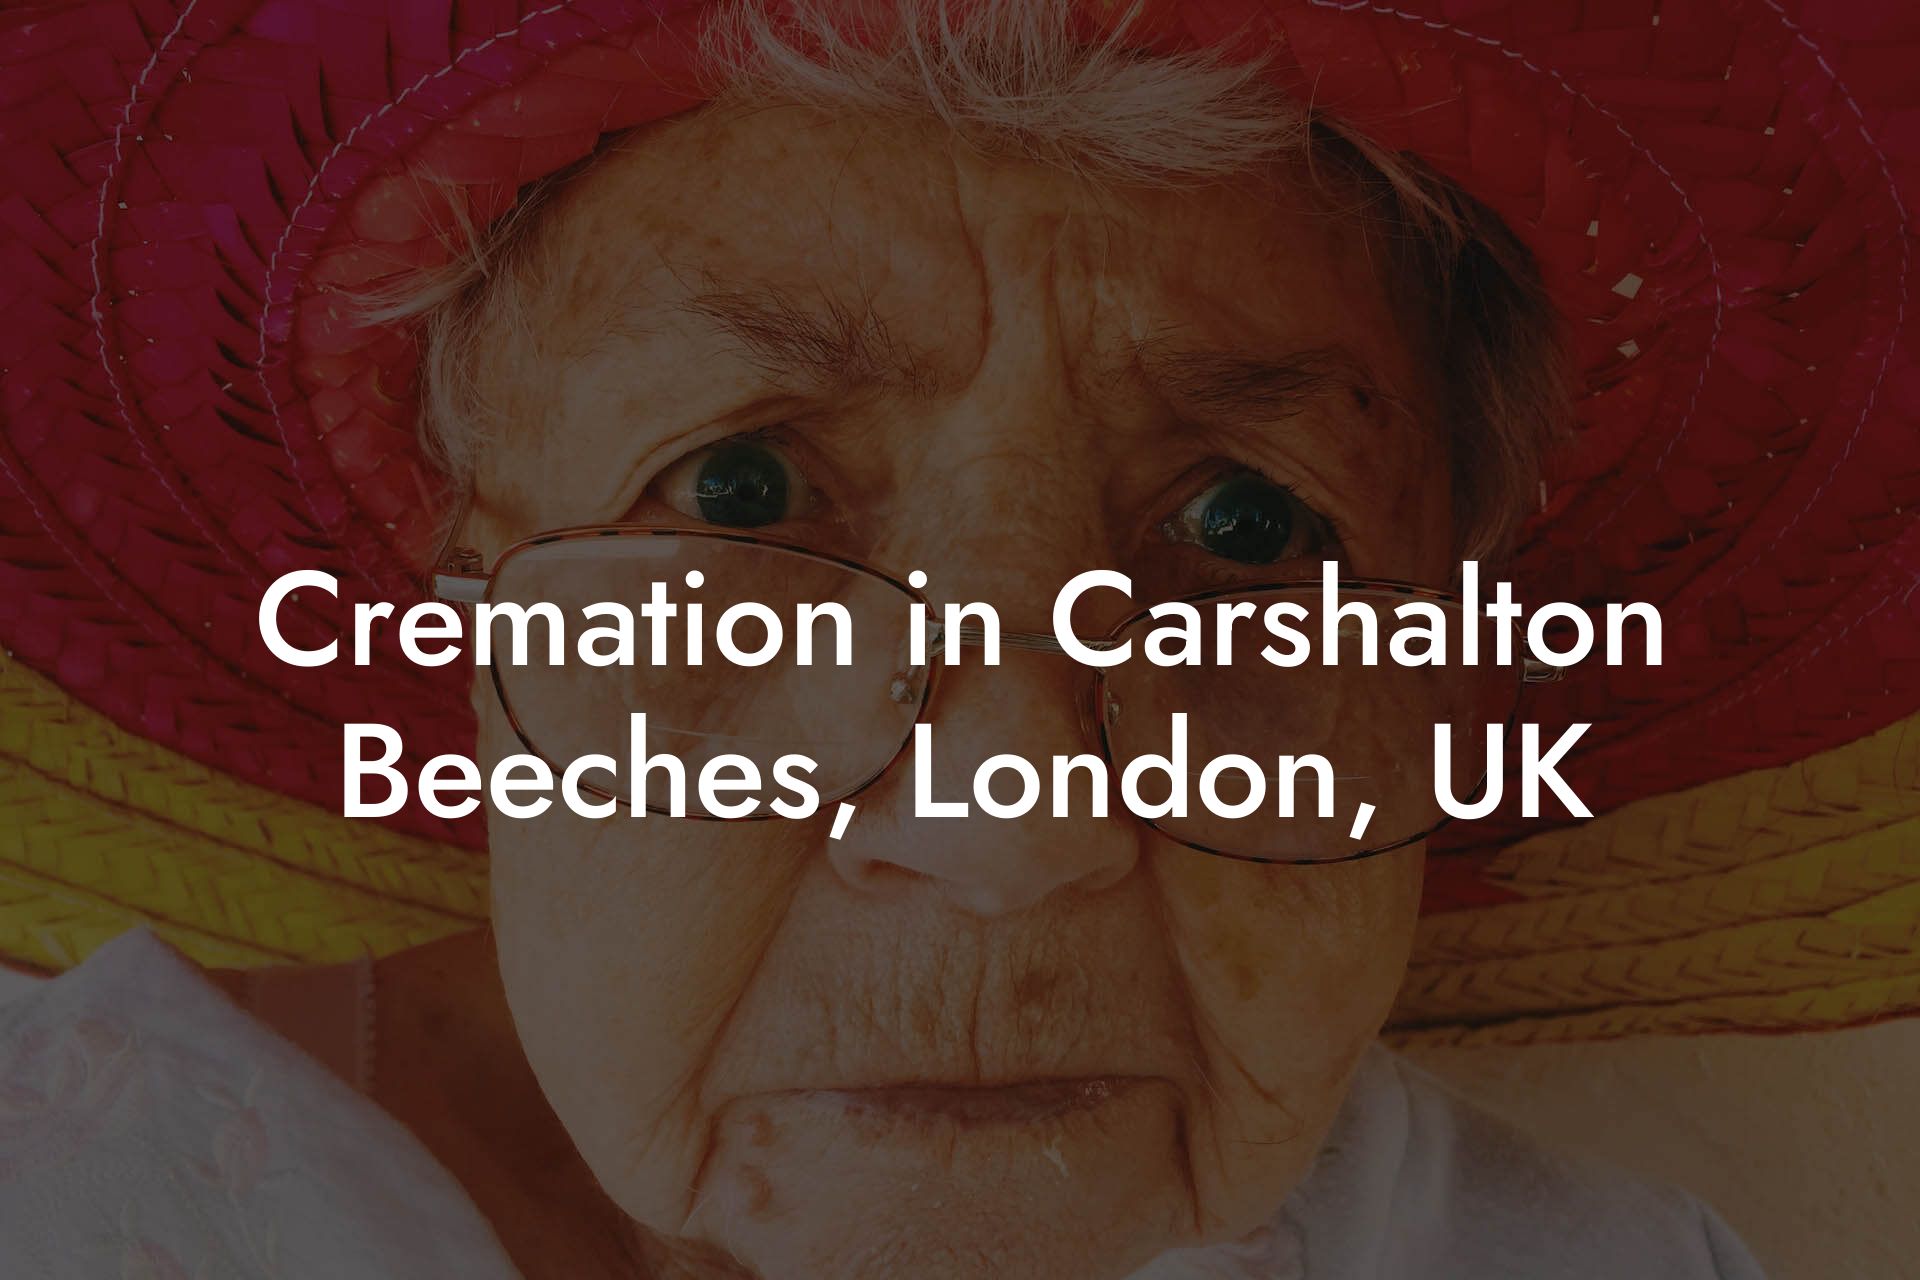 Cremation in Carshalton Beeches, London, UK